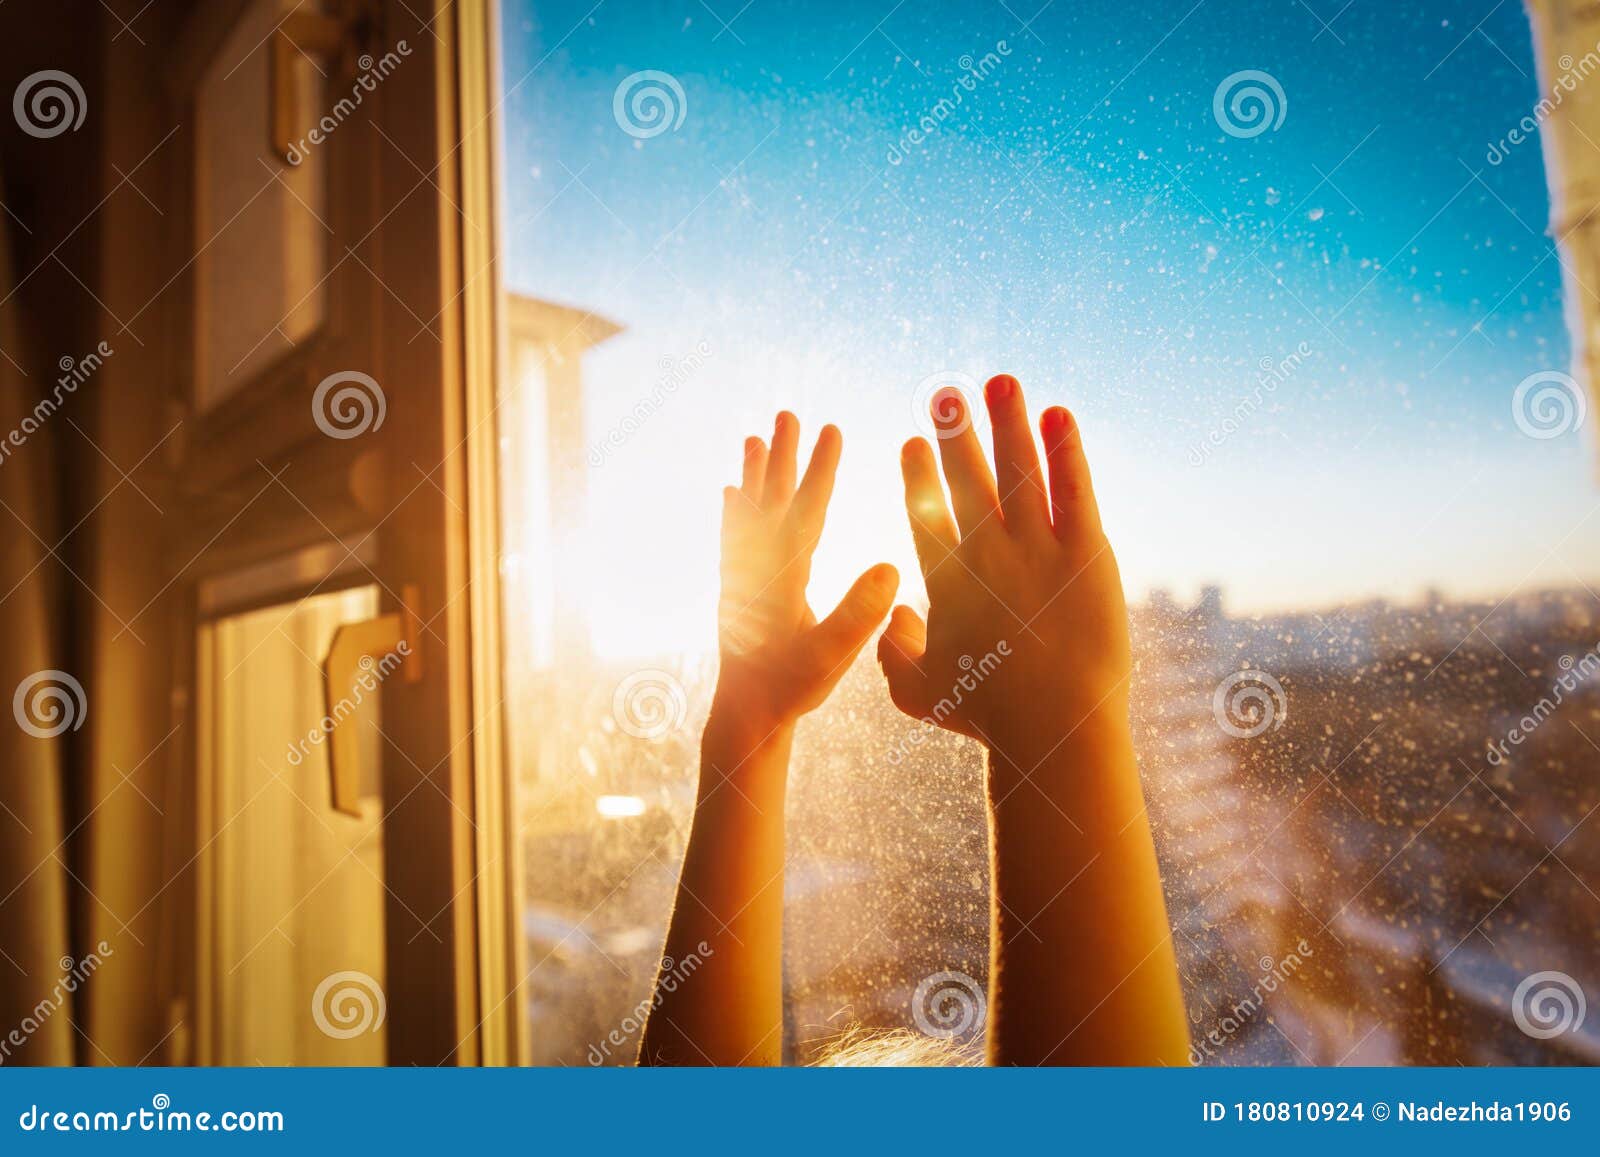 child stay home, kids on lockdown concept, baby hands on the window